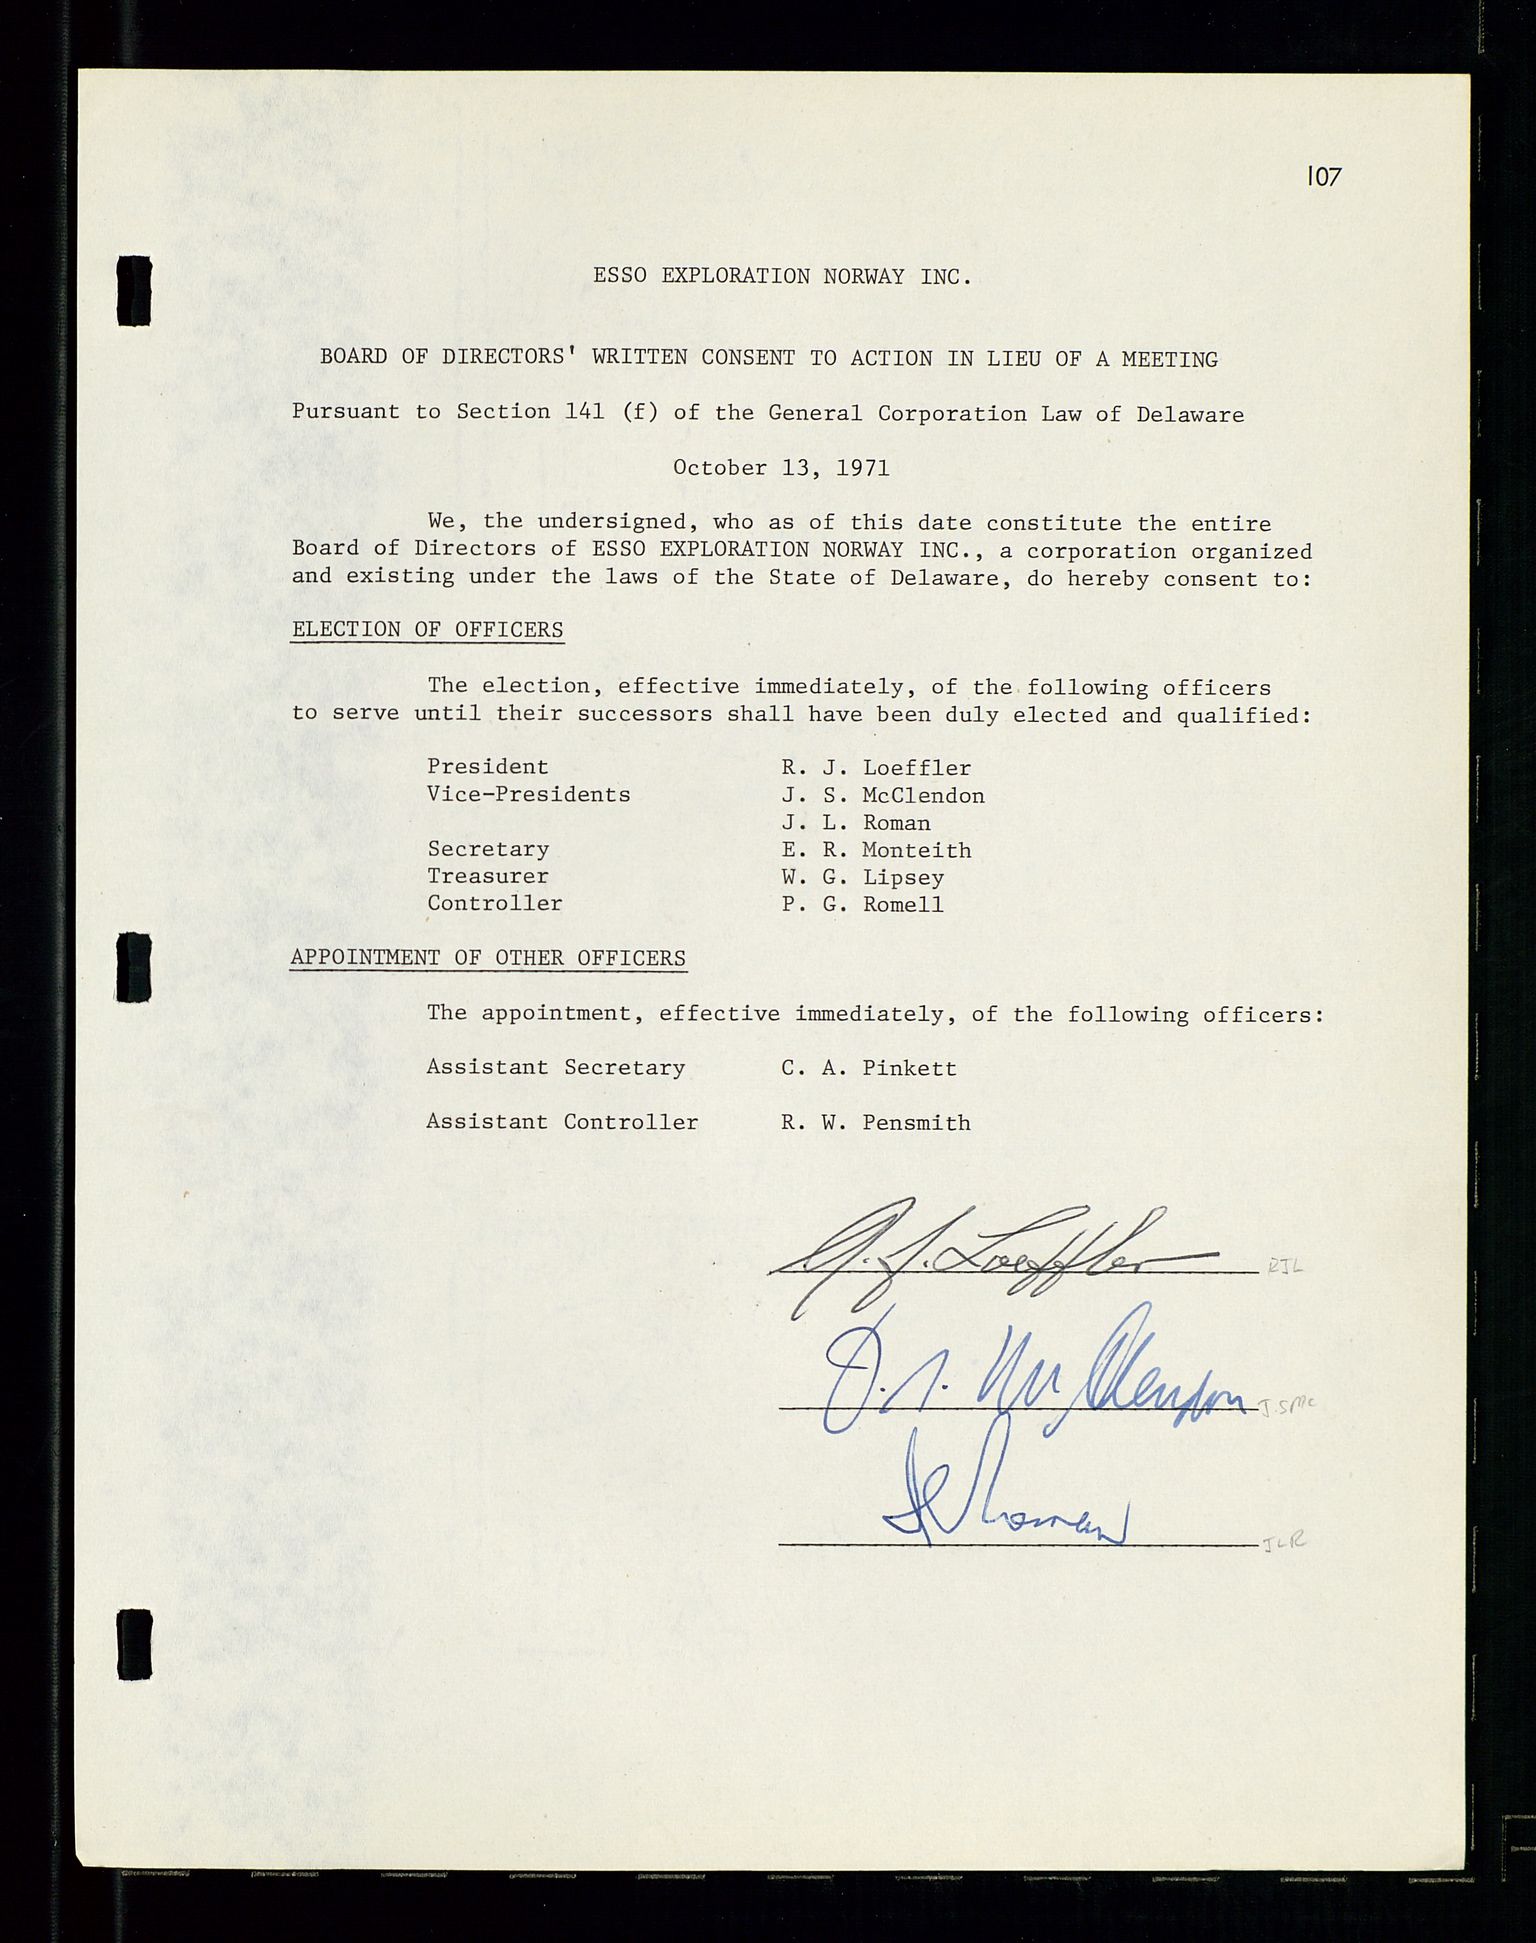 Pa 1512 - Esso Exploration and Production Norway Inc., SAST/A-101917/A/Aa/L0001/0001: Styredokumenter / Corporate records, By-Laws, Board meeting minutes, Incorporations, 1965-1975, p. 107